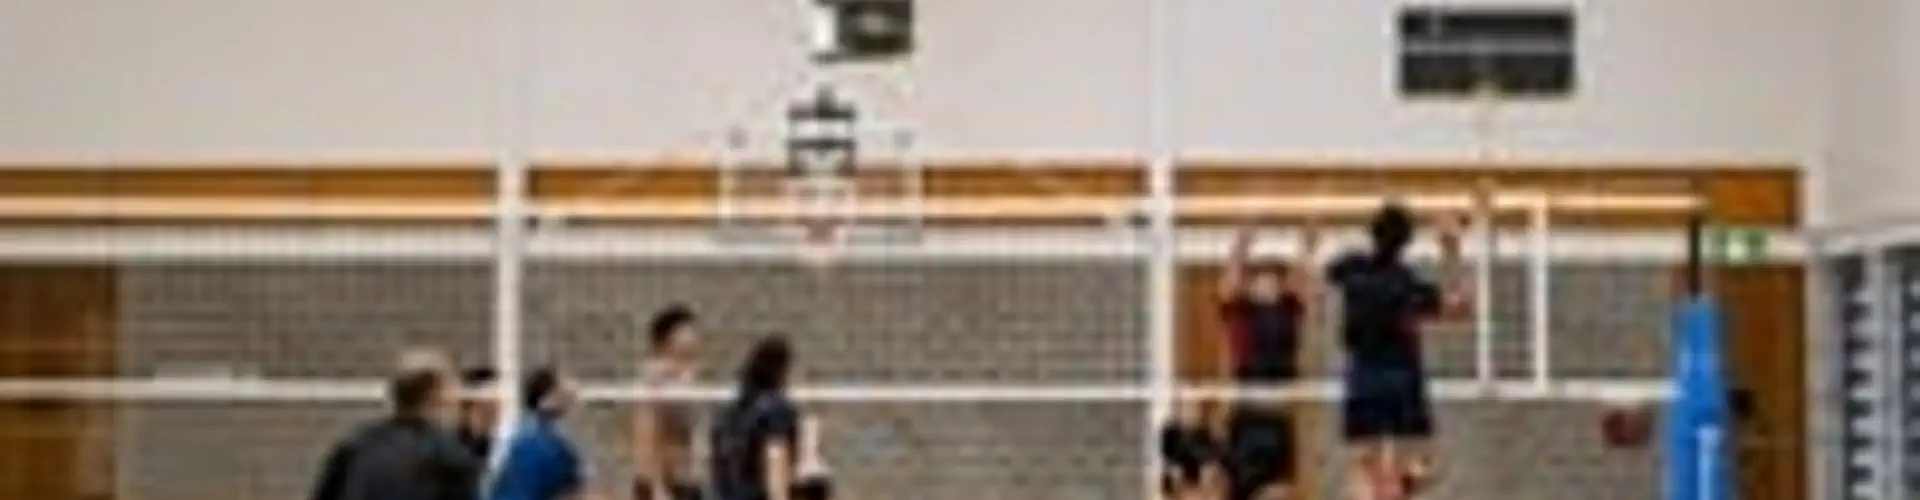 Community Centre volleyball